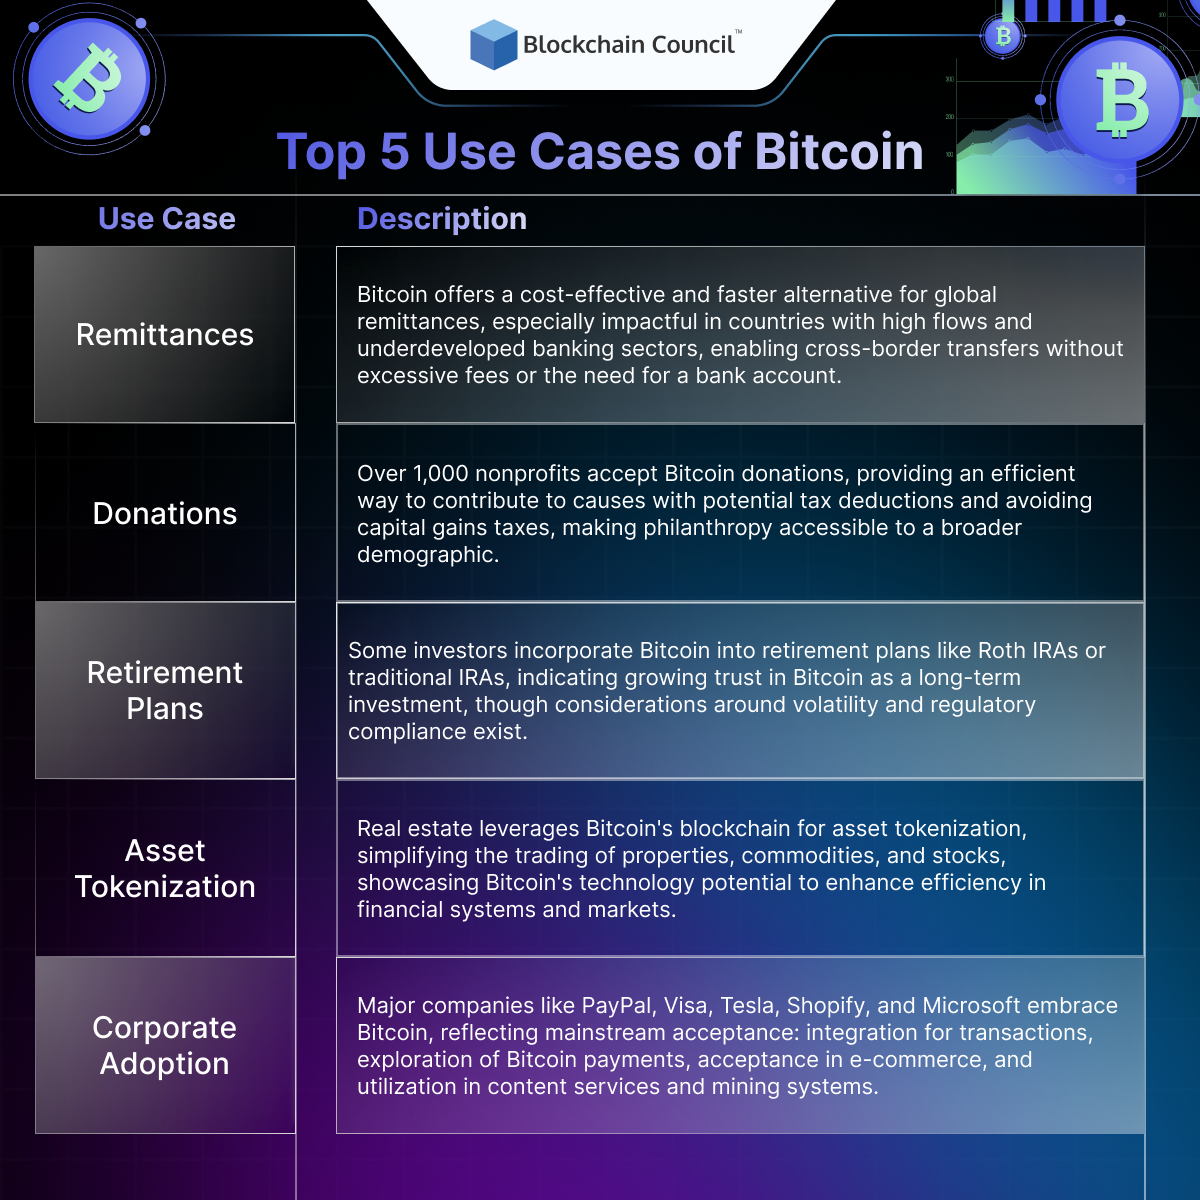 Top 5 Use Cases of Bitcoin